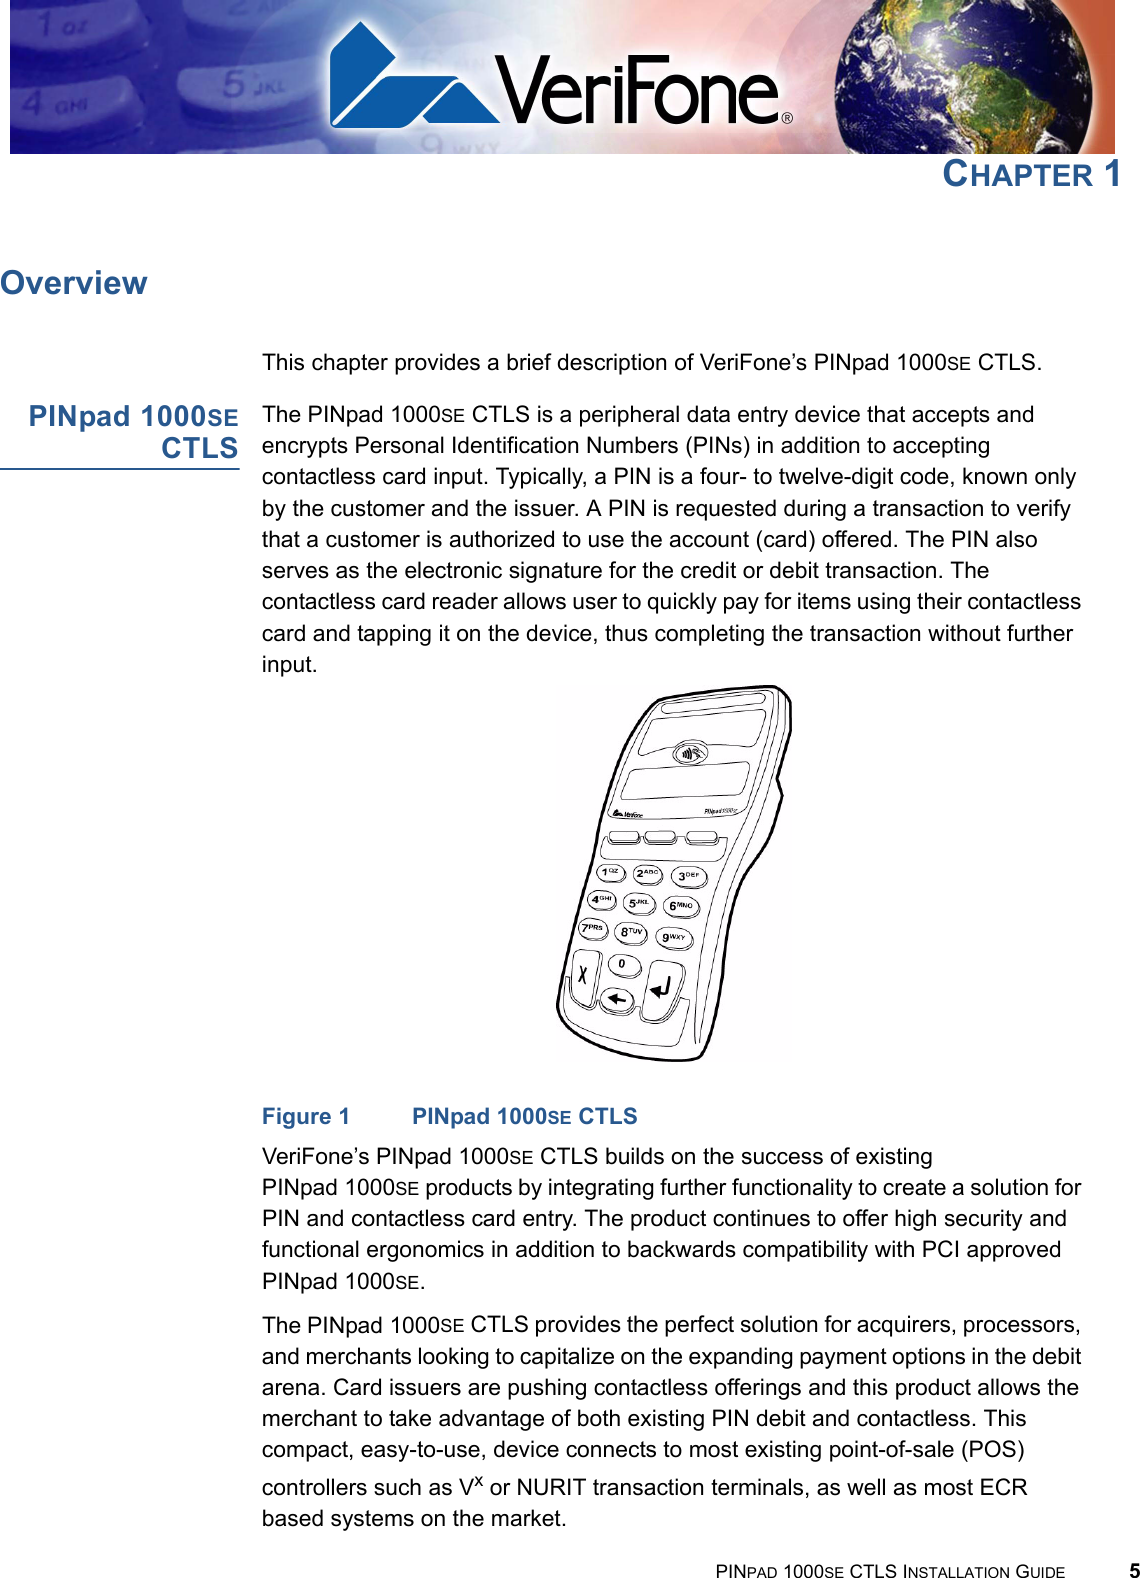 PINPAD 1000SE CTLS INSTALLATION GUIDE 5CHAPTER 1OverviewThis chapter provides a brief description of VeriFone’s PINpad 1000SE CTLS.PINpad 1000SECTLSThe PINpad 1000SE CTLS is a peripheral data entry device that accepts and encrypts Personal Identification Numbers (PINs) in addition to accepting contactless card input. Typically, a PIN is a four- to twelve-digit code, known only by the customer and the issuer. A PIN is requested during a transaction to verify that a customer is authorized to use the account (card) offered. The PIN also serves as the electronic signature for the credit or debit transaction. The contactless card reader allows user to quickly pay for items using their contactless card and tapping it on the device, thus completing the transaction without further input.Figure 1 PINpad 1000SE CTLSVeriFone’s PINpad 1000SE CTLS builds on the success of existing PINpad 1000SE products by integrating further functionality to create a solution for PIN and contactless card entry. The product continues to offer high security and functional ergonomics in addition to backwards compatibility with PCI approved PINpad 1000SE.The PINpad 1000SE CTLS provides the perfect solution for acquirers, processors, and merchants looking to capitalize on the expanding payment options in the debit arena. Card issuers are pushing contactless offerings and this product allows the merchant to take advantage of both existing PIN debit and contactless. This  compact, easy-to-use, device connects to most existing point-of-sale (POS) controllers such as Vx or NURIT transaction terminals, as well as most ECR based systems on the market. 